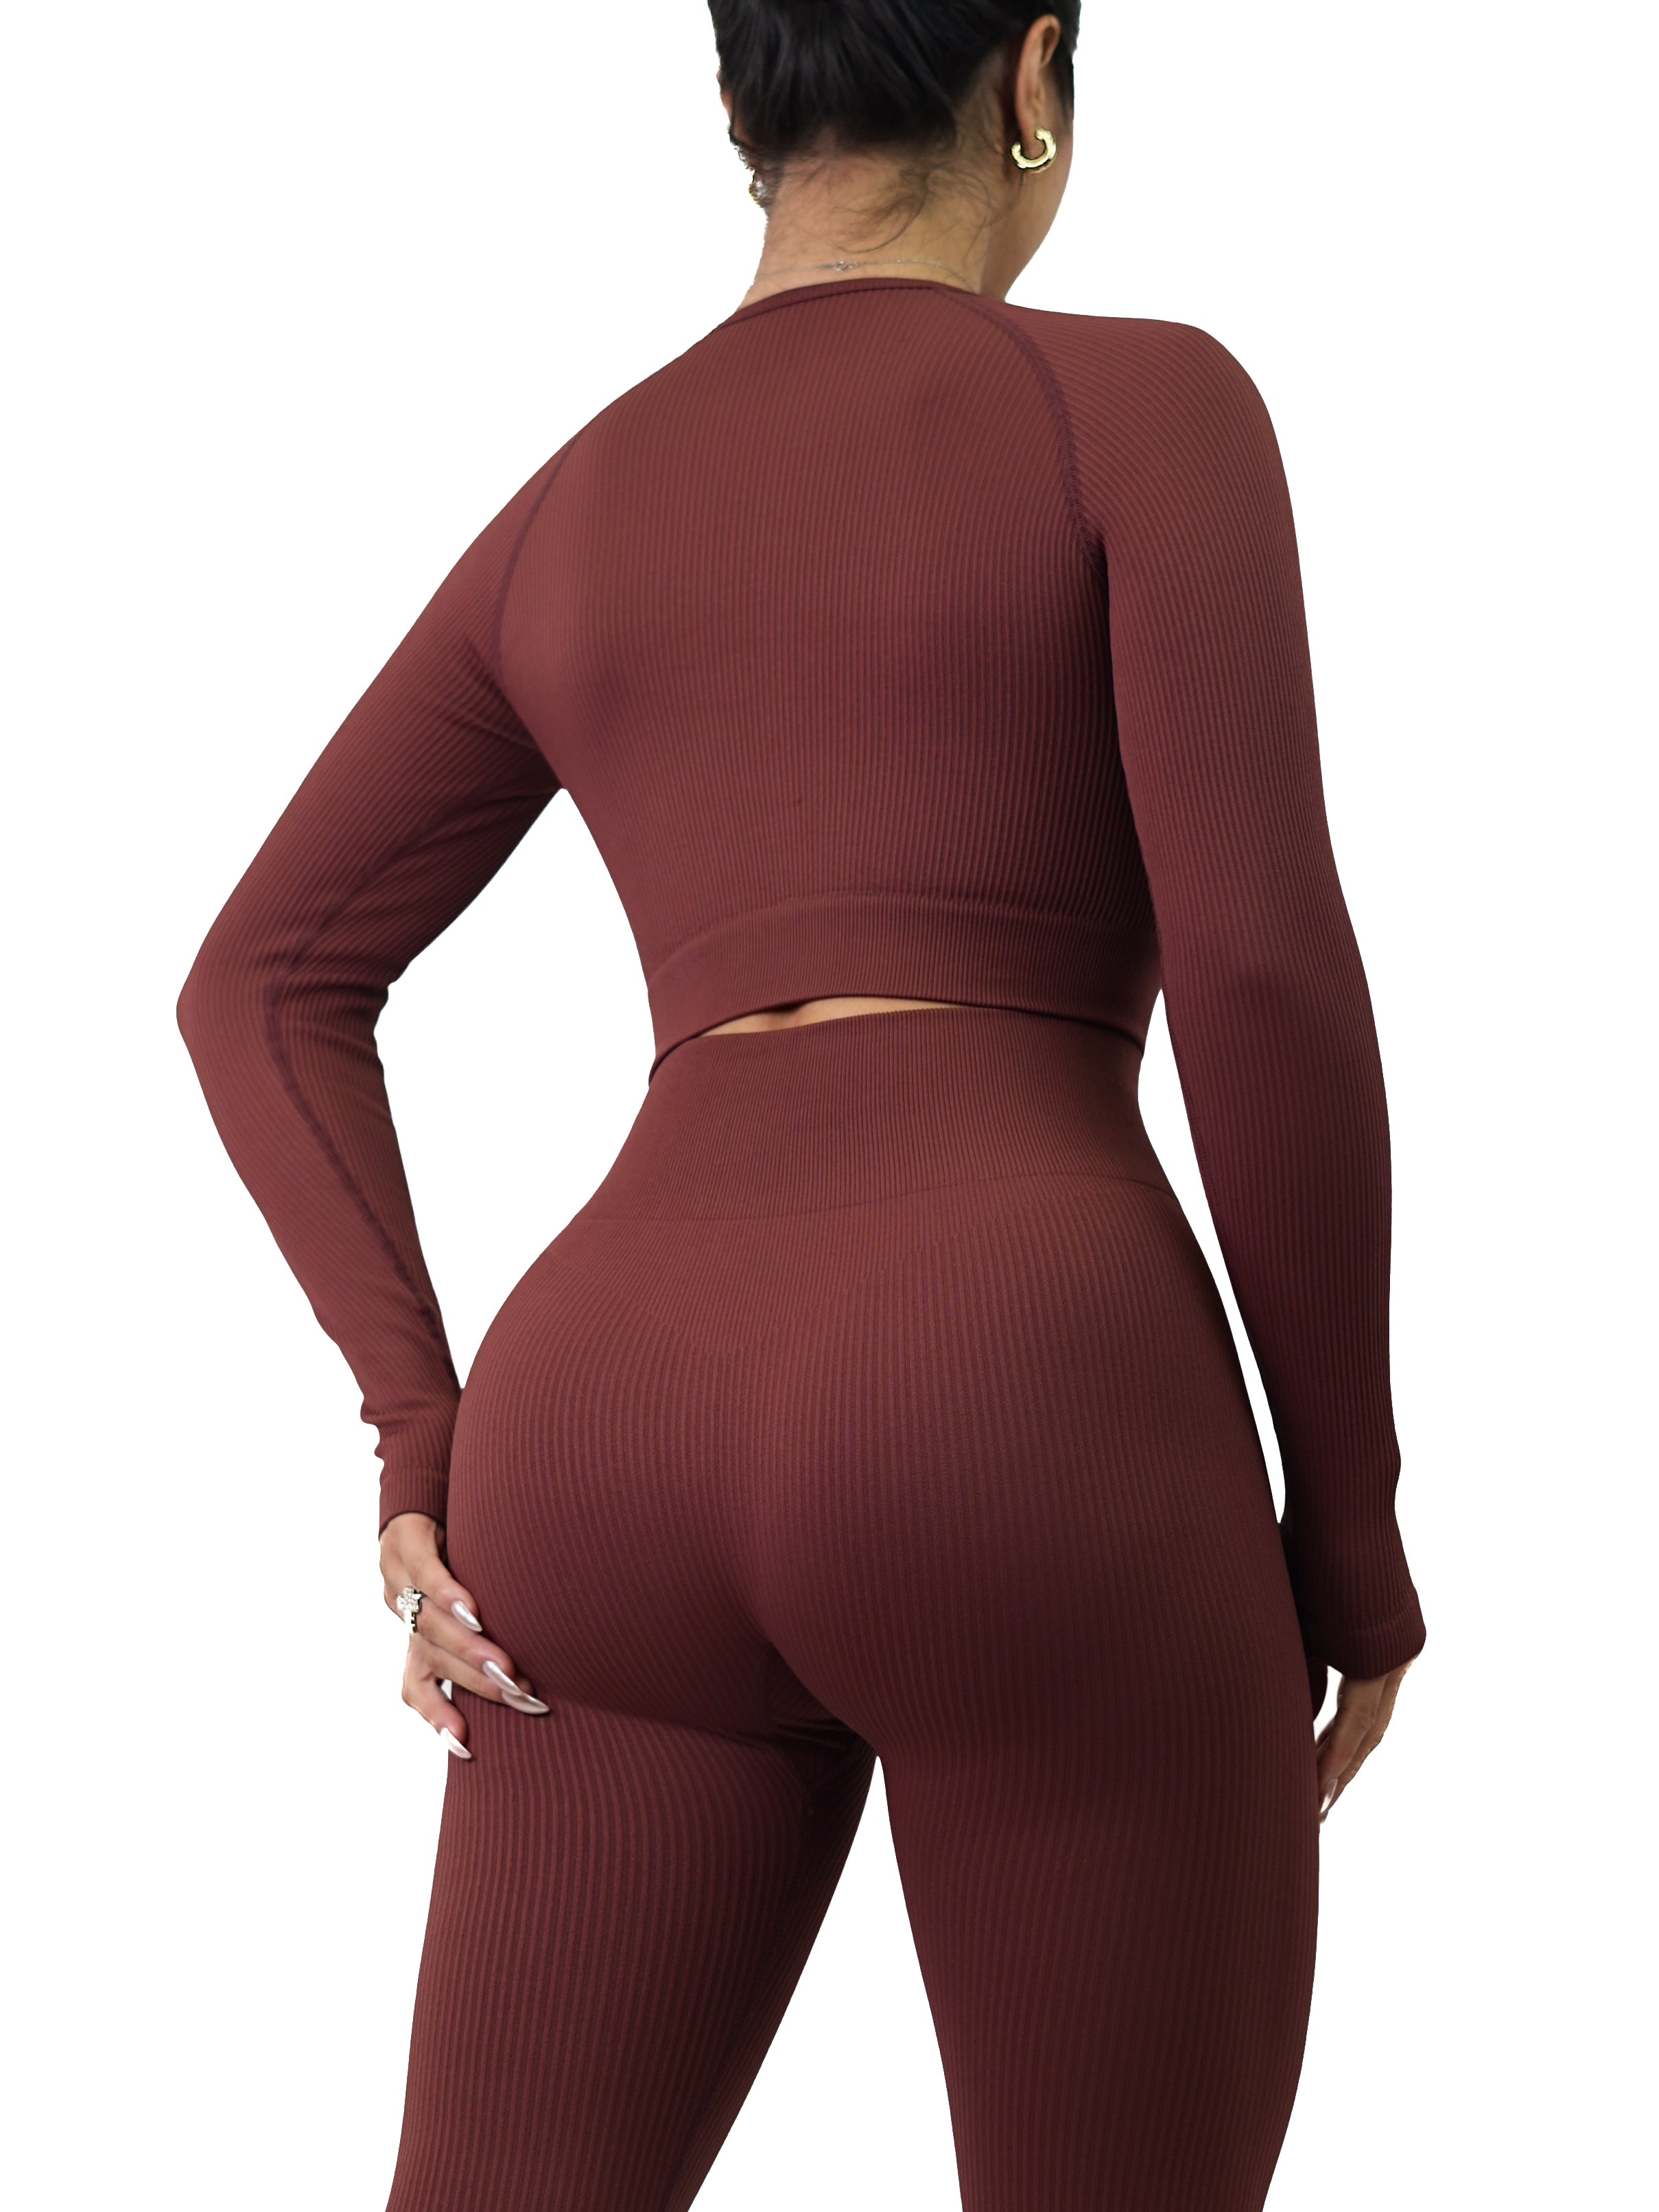 Fitted Ribbed Long Sleeve Top (Apple Brown)